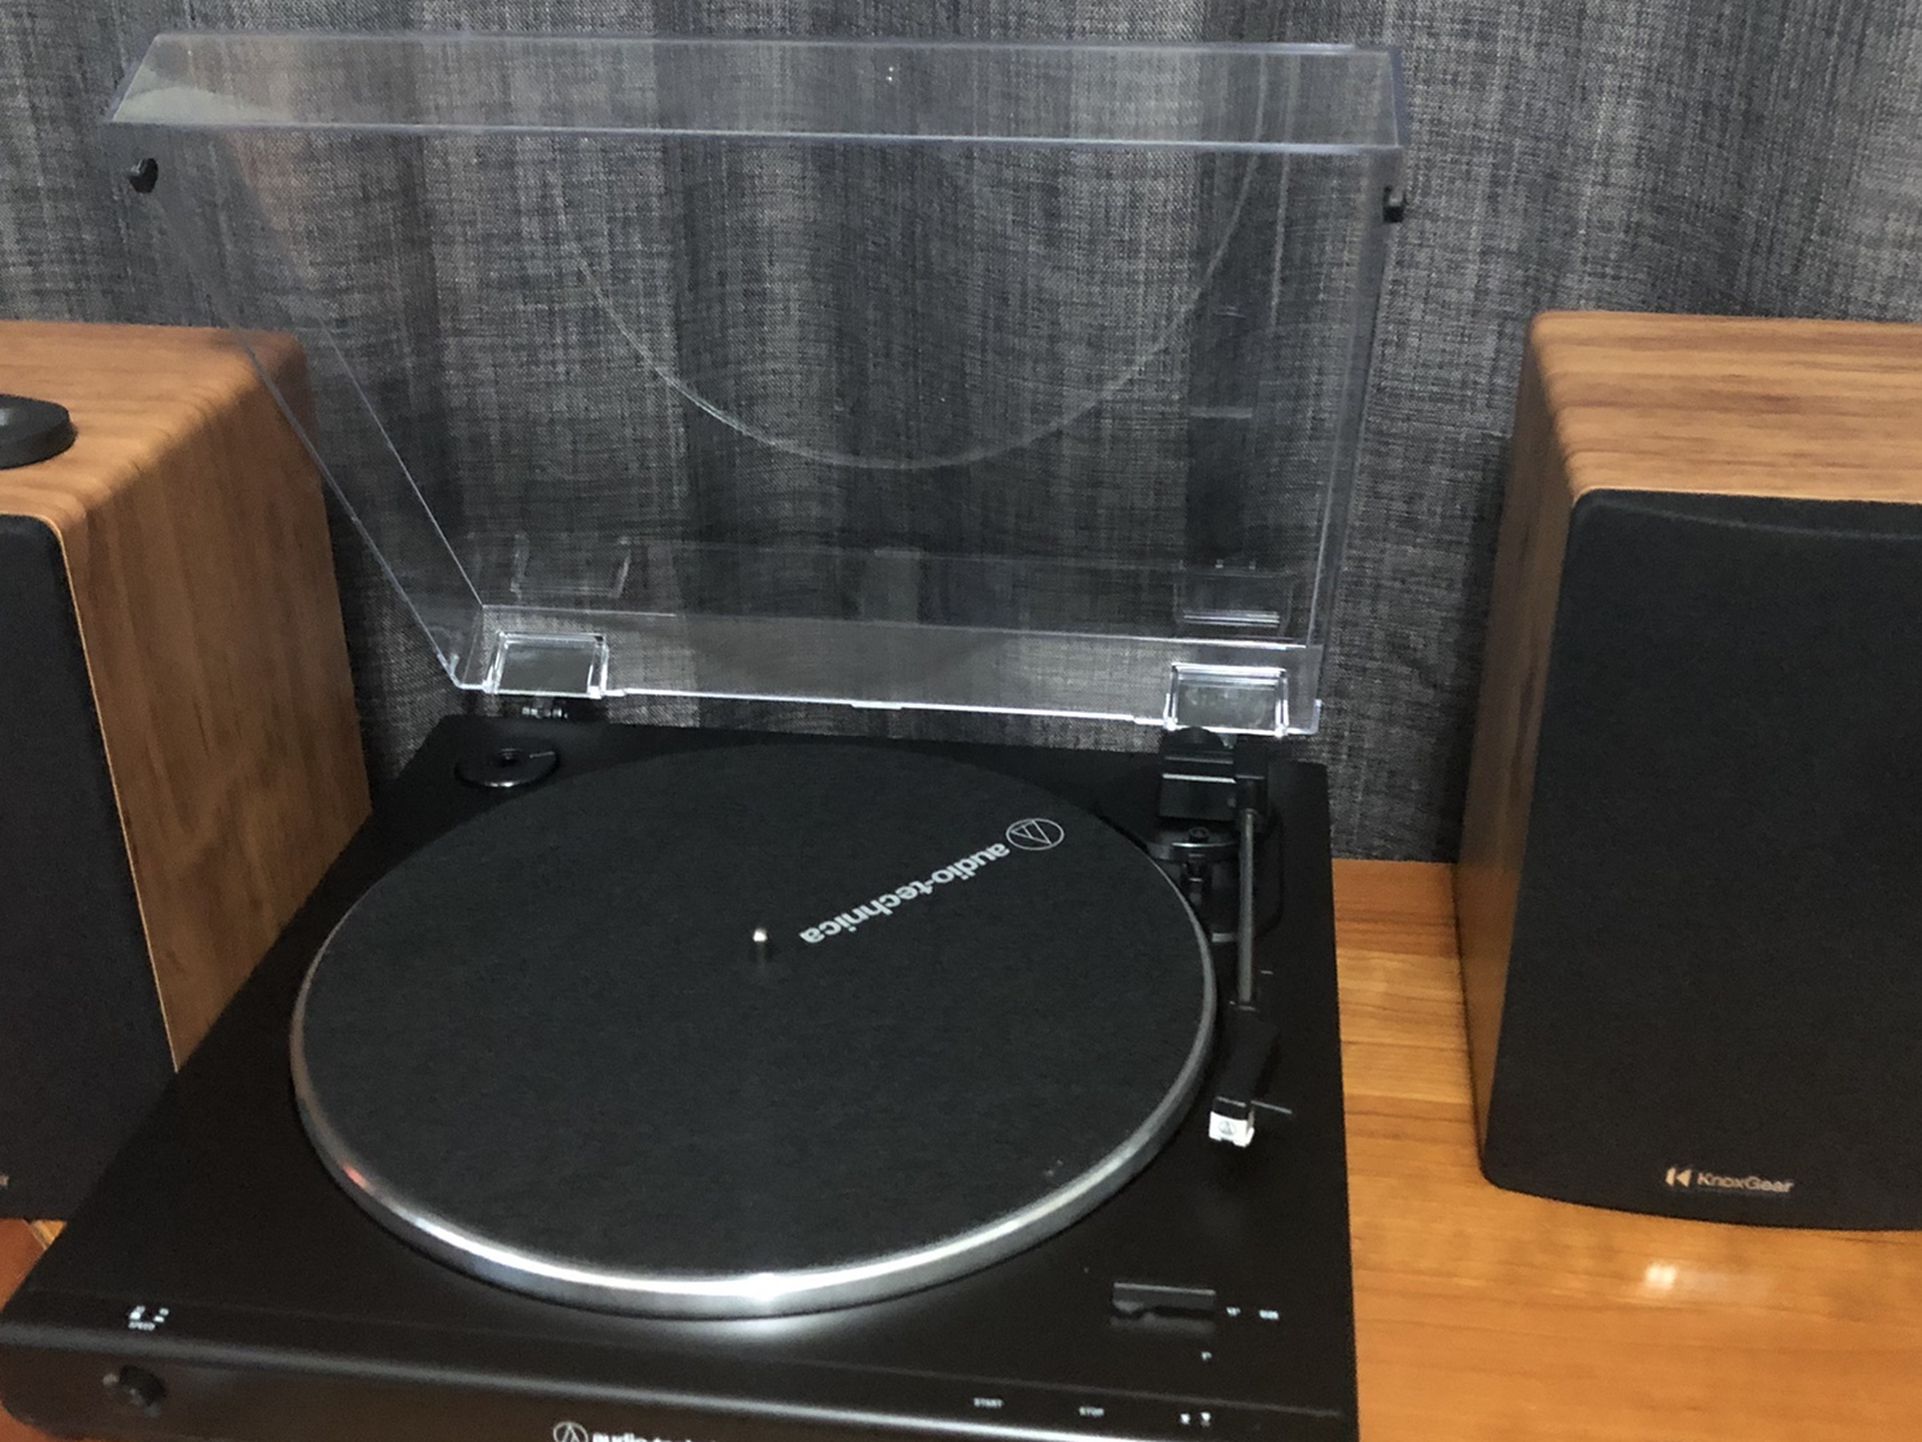 AudioTechnica ATLP60X Turntable Black with Knox Gear Bluetooth Speakers Pair - Brand New Wrapped In Box And Plastic Cover